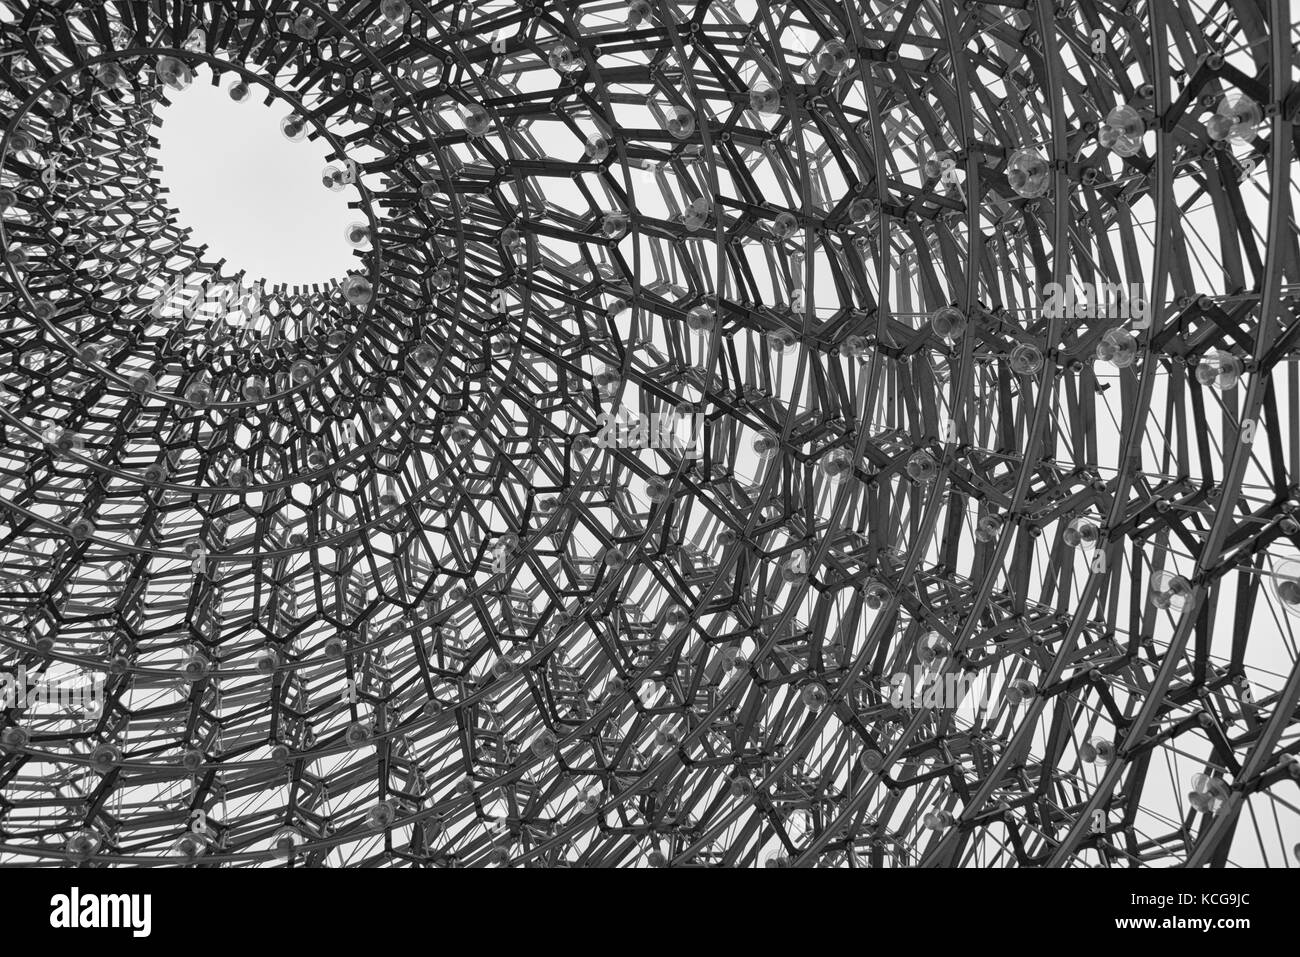 The Hive metal structure at Kew Botanical Gardens in London Stock Photo